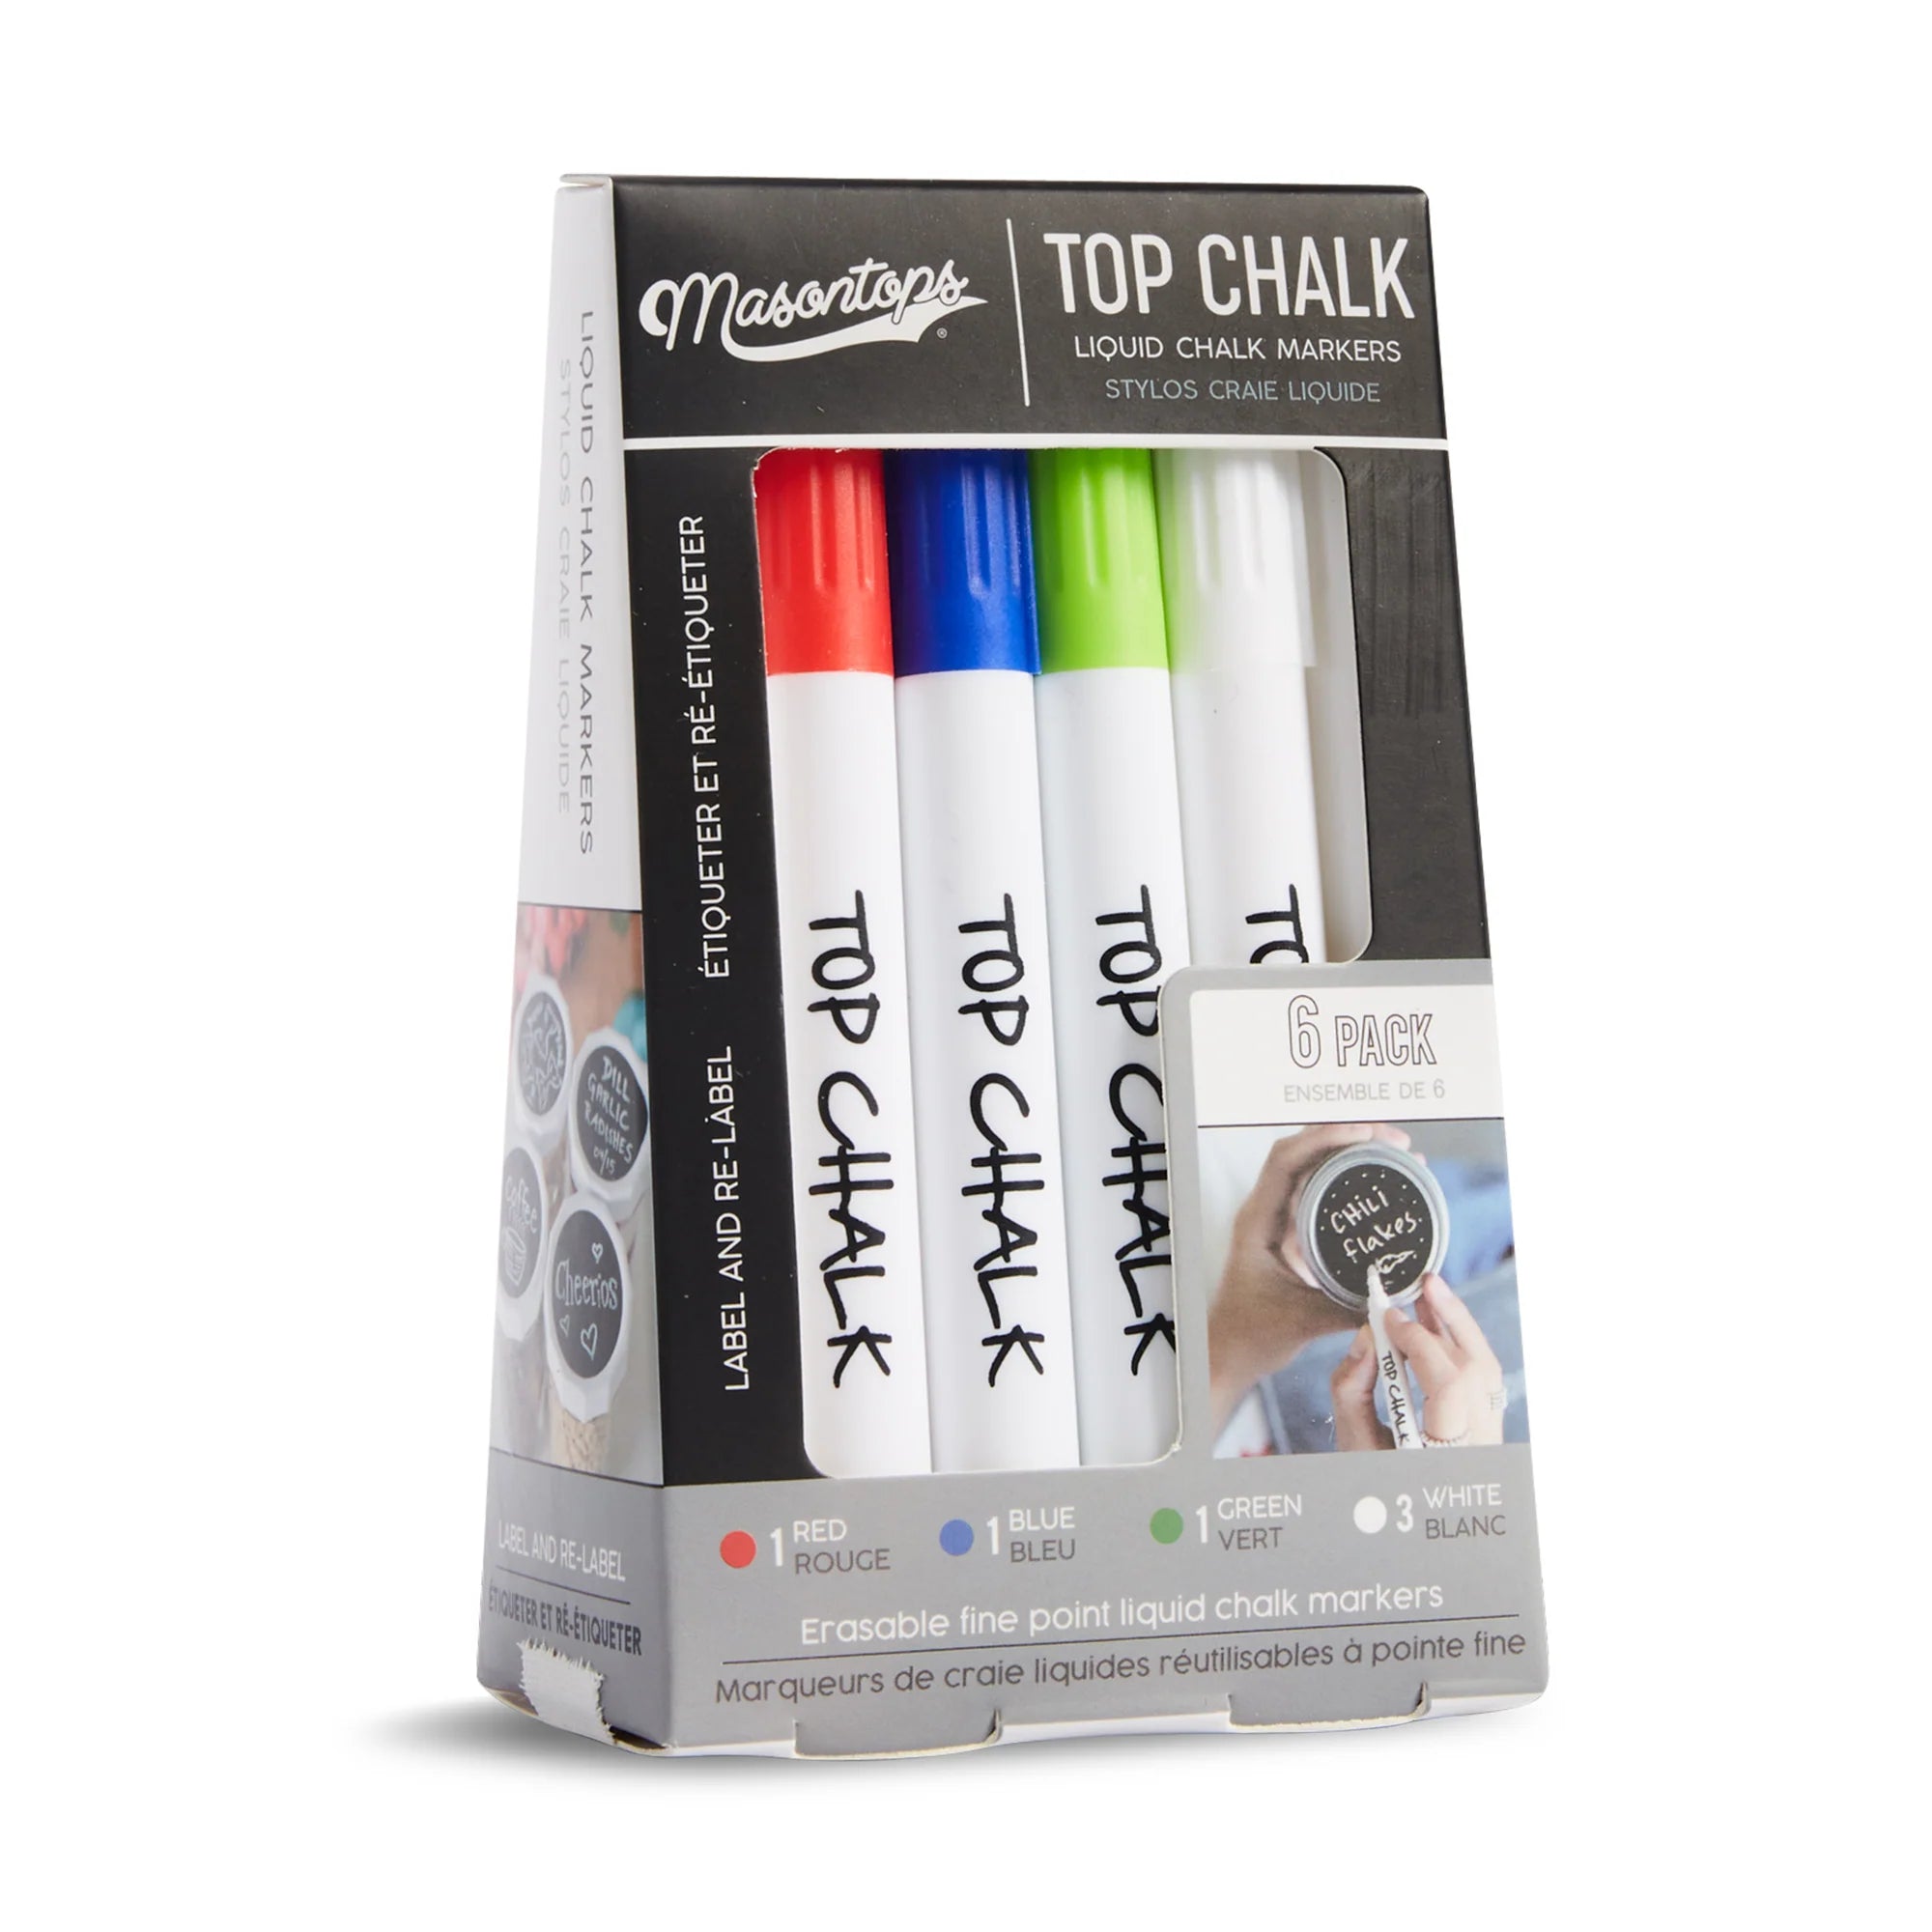 How to Use a Chalk Marker 101 Guide